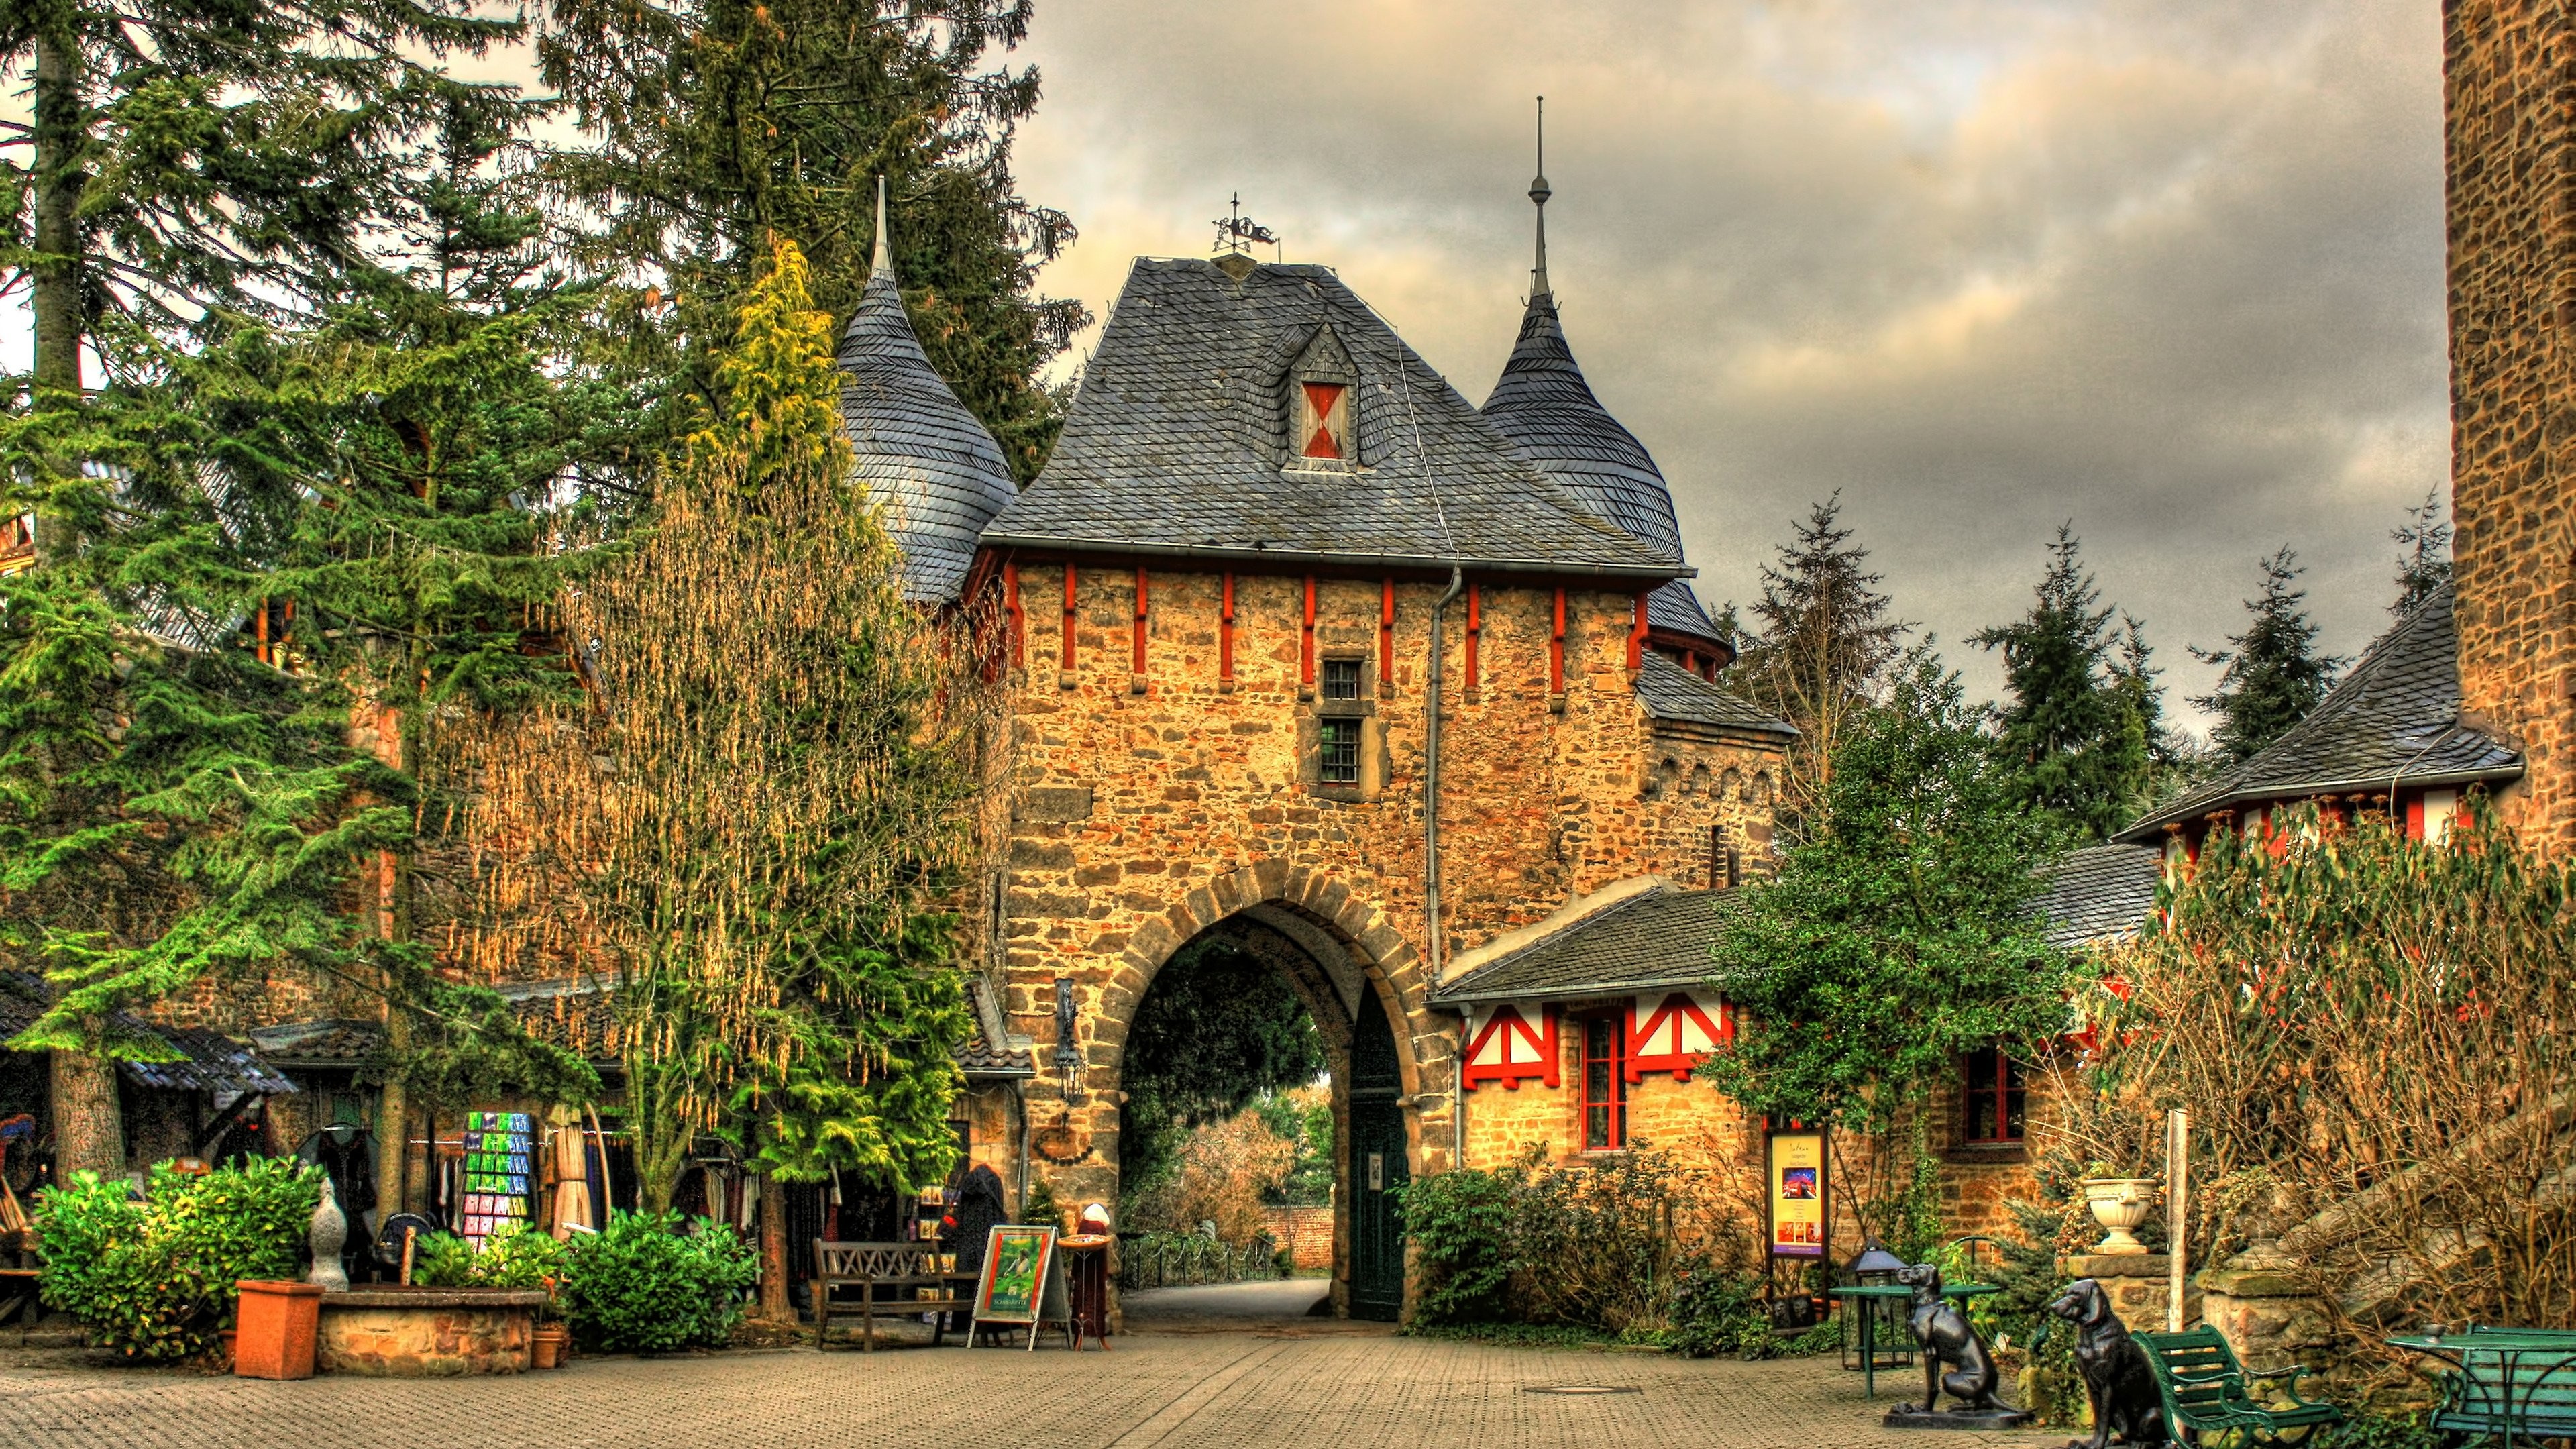 General 3840x2160 architecture castle ancient trees Germany HDR arch pine trees bench stones